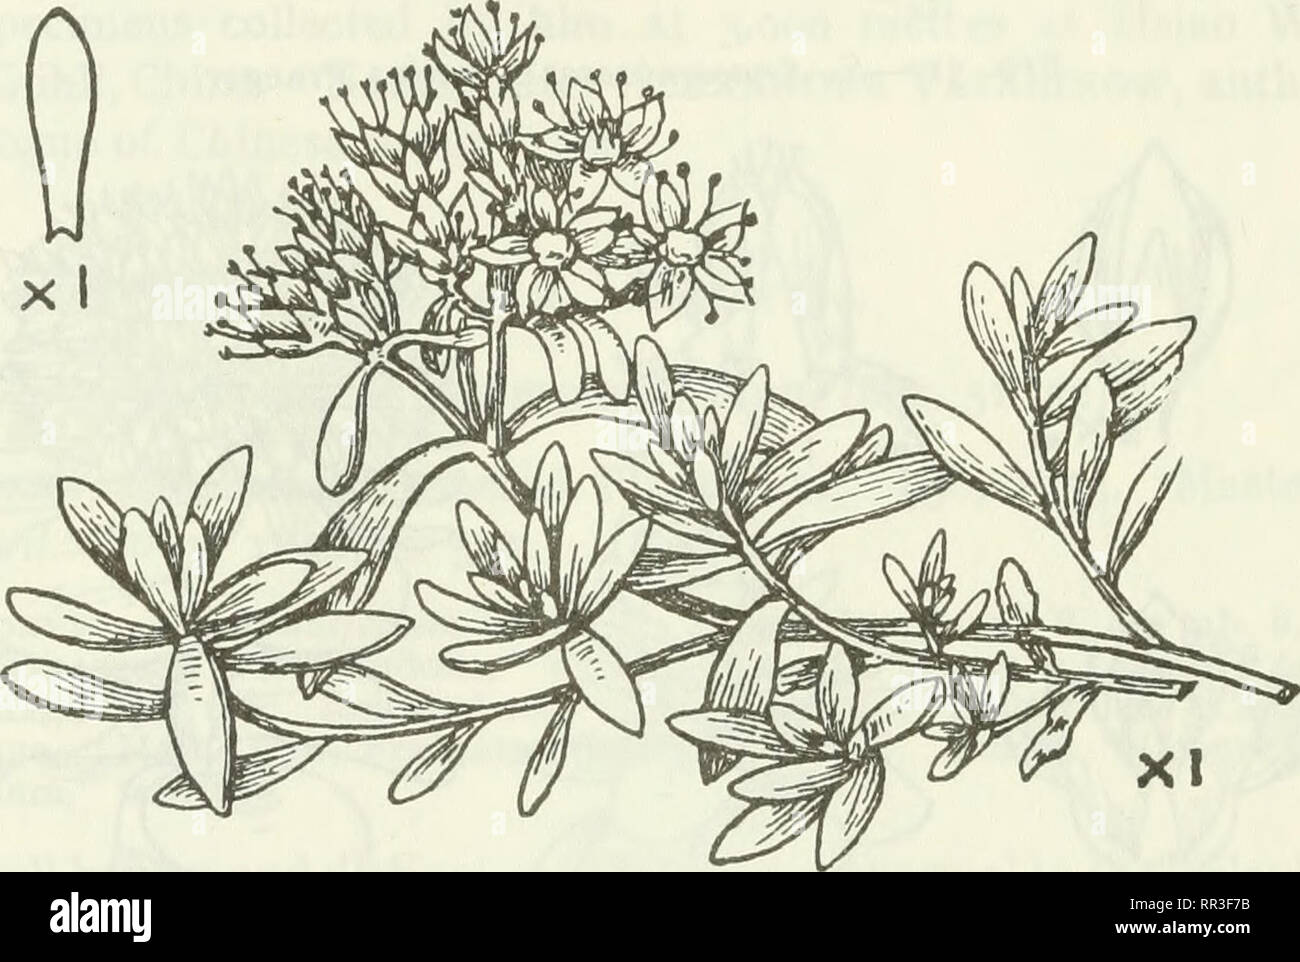 . An account of the genus Sedum as found in cultivation. Sedum; Crassulaceae. I06 JOURNAL OF THE ROYAL HORTICULTURAL SOCIETY. Flowers July-August. Hardy. Habitat.—Alpine rocks from N. Spain to the Tyrol. The form majus has been sent to me from the Alps by Mr. E. A. Bowles along with the type, and I have seen it in several gardens. The name Anacampseros is that of a genus of Portulaceae, and is derived from the Greek anakampto, &quot; to cause return,&quot; and eros, &quot; love.&quot; 35. Sedum cyaneum Rudolph (fig. 53). S. cyaneum Rudolph in Mem. Acad. Petersbourg, 4, 341, 1811. Maxi- mowicz  Stock Photo